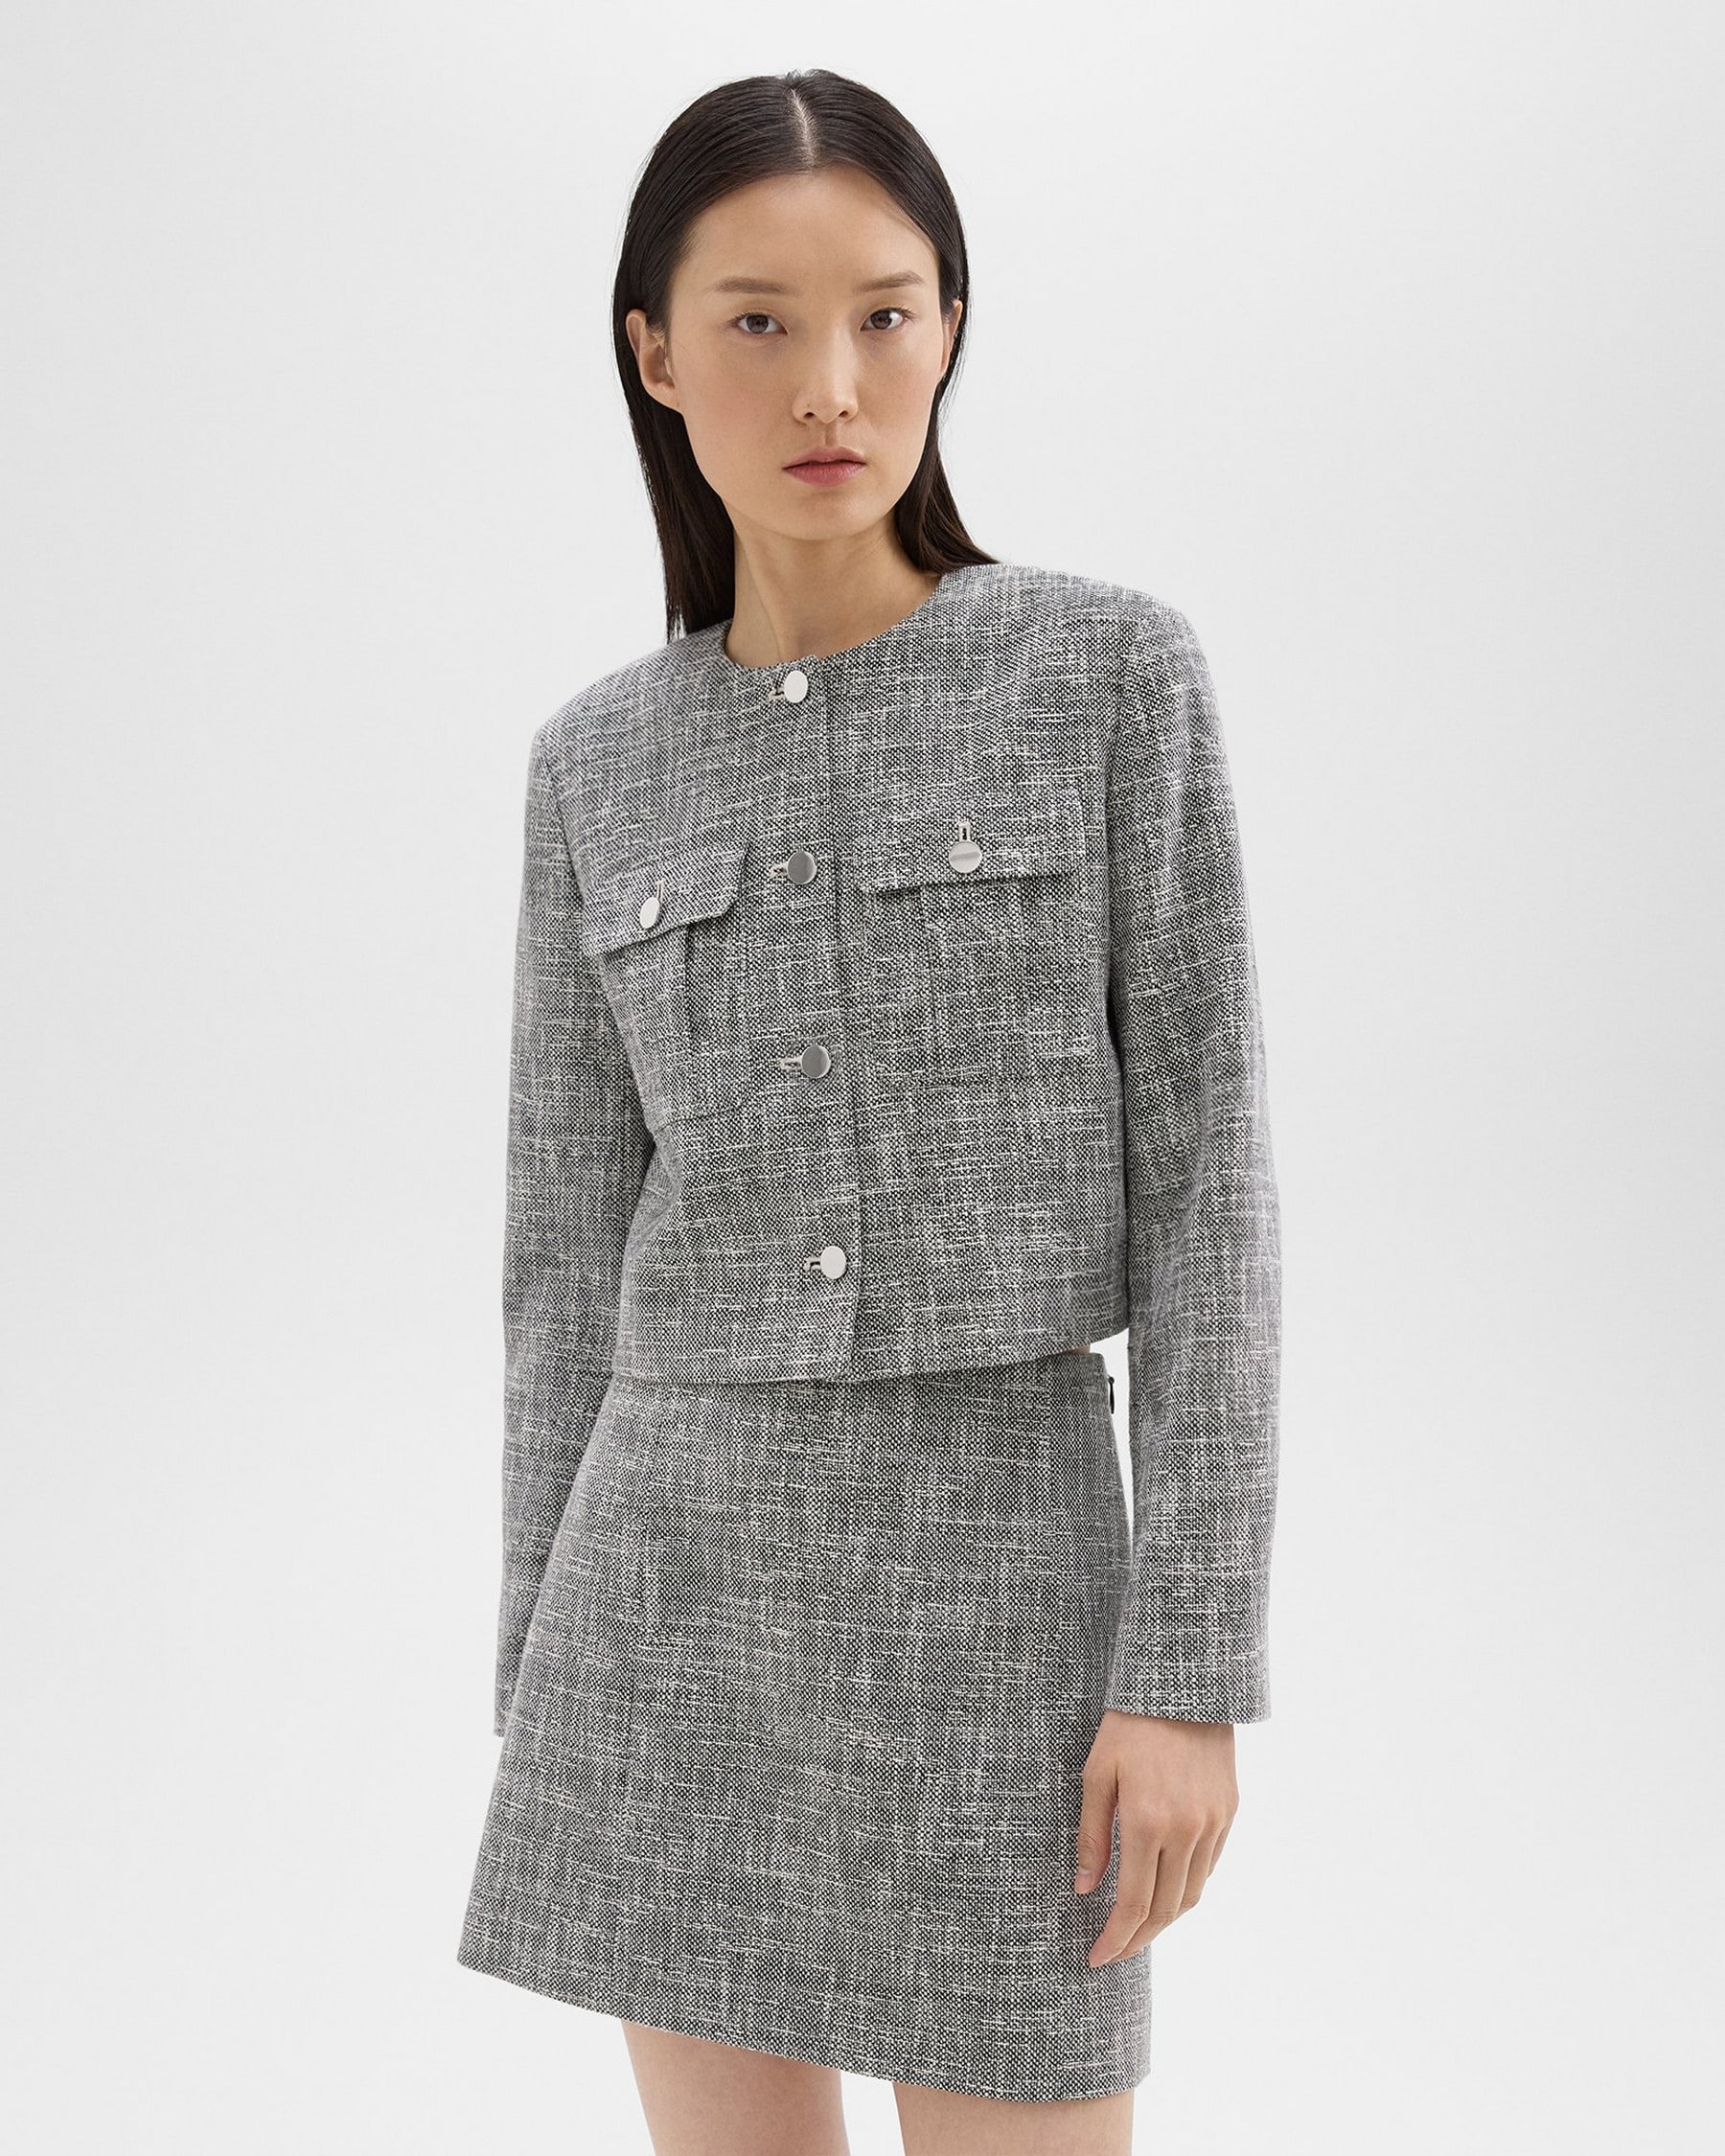 Cropped Military Jacket in Cotton Tweed